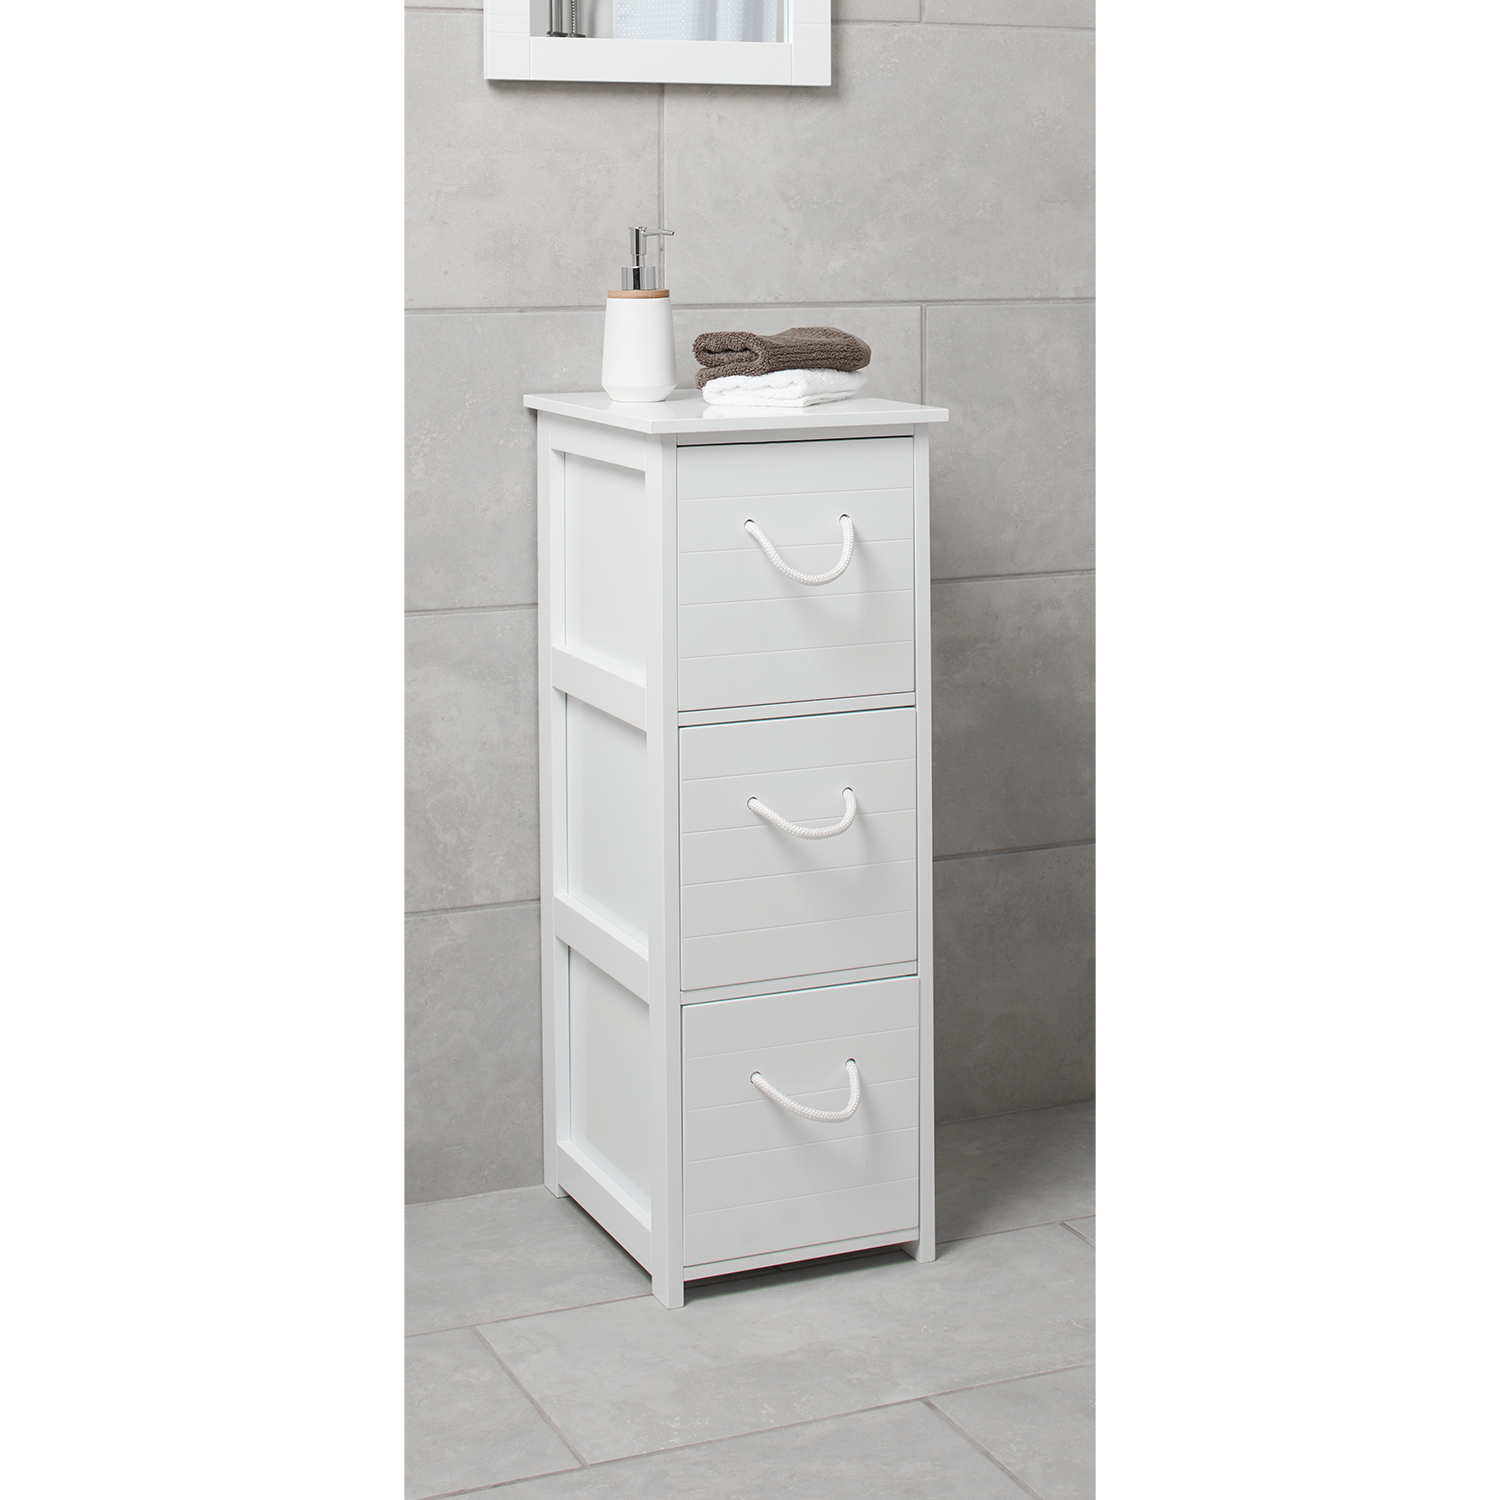 Aura 3 Drawer White Cabinet with Rope Handles Image 3